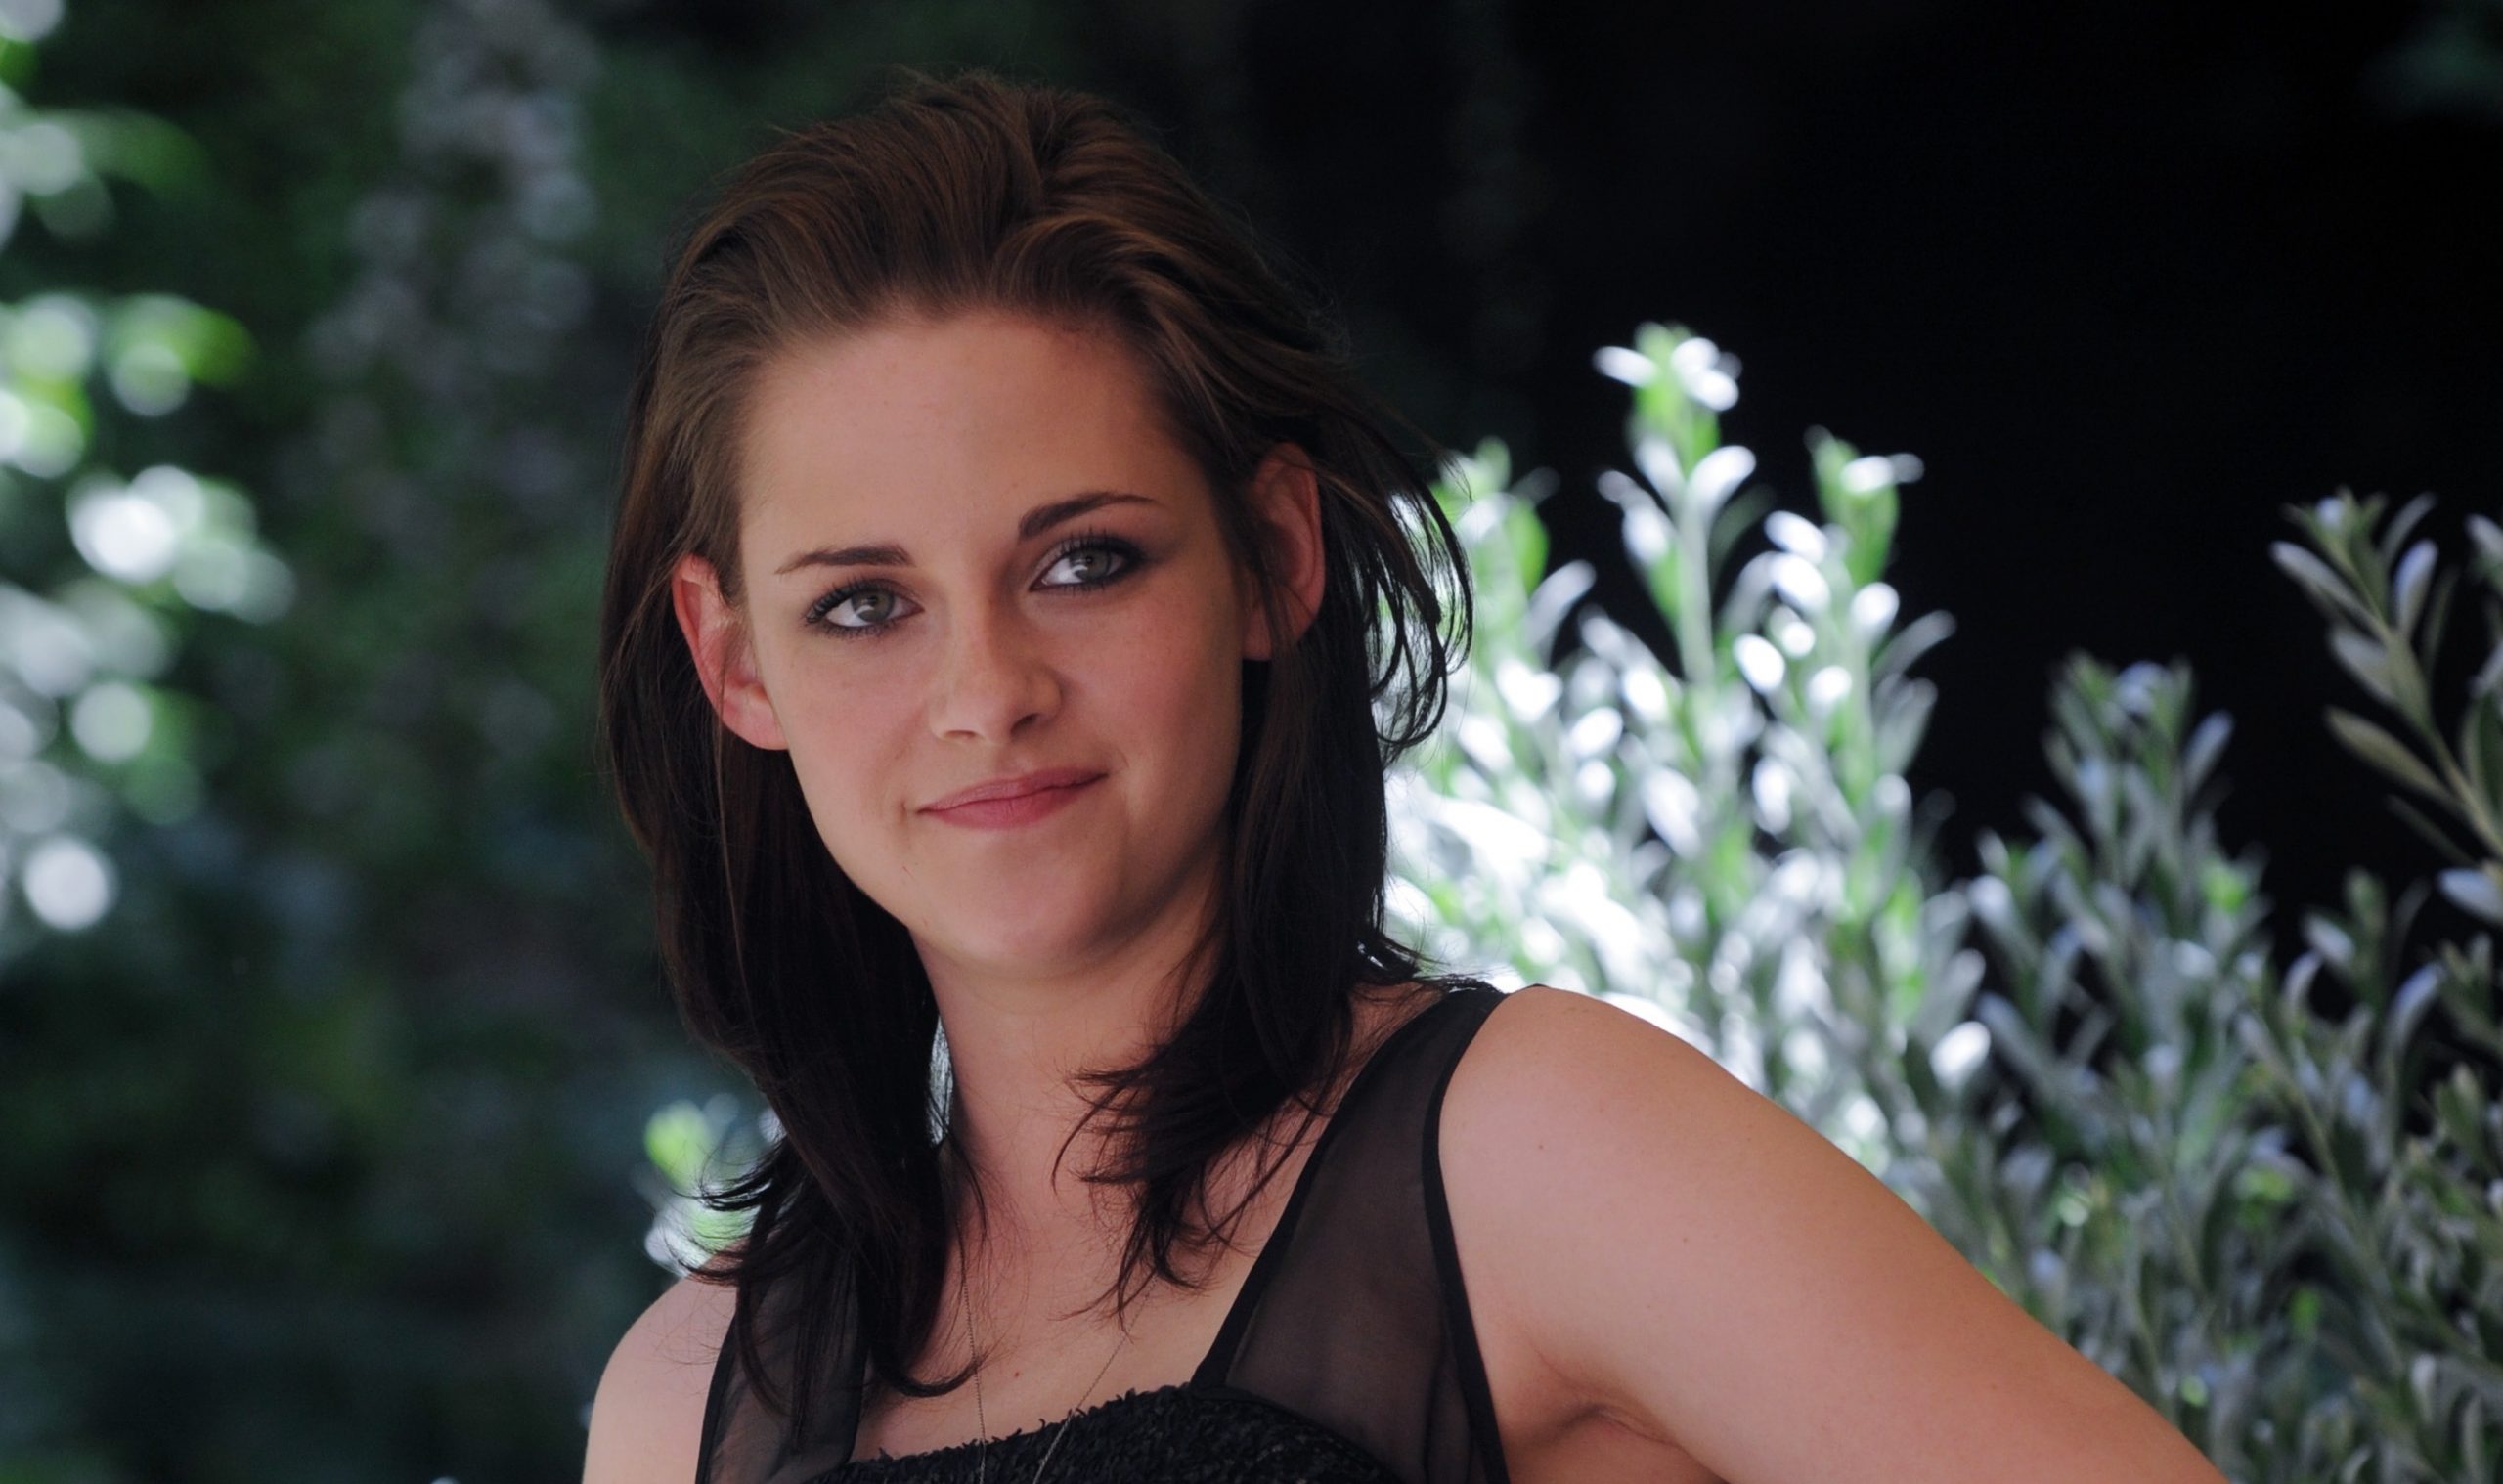 Twilight' Star Kristen Stewart Once Said 'I Couldn't Have Done the